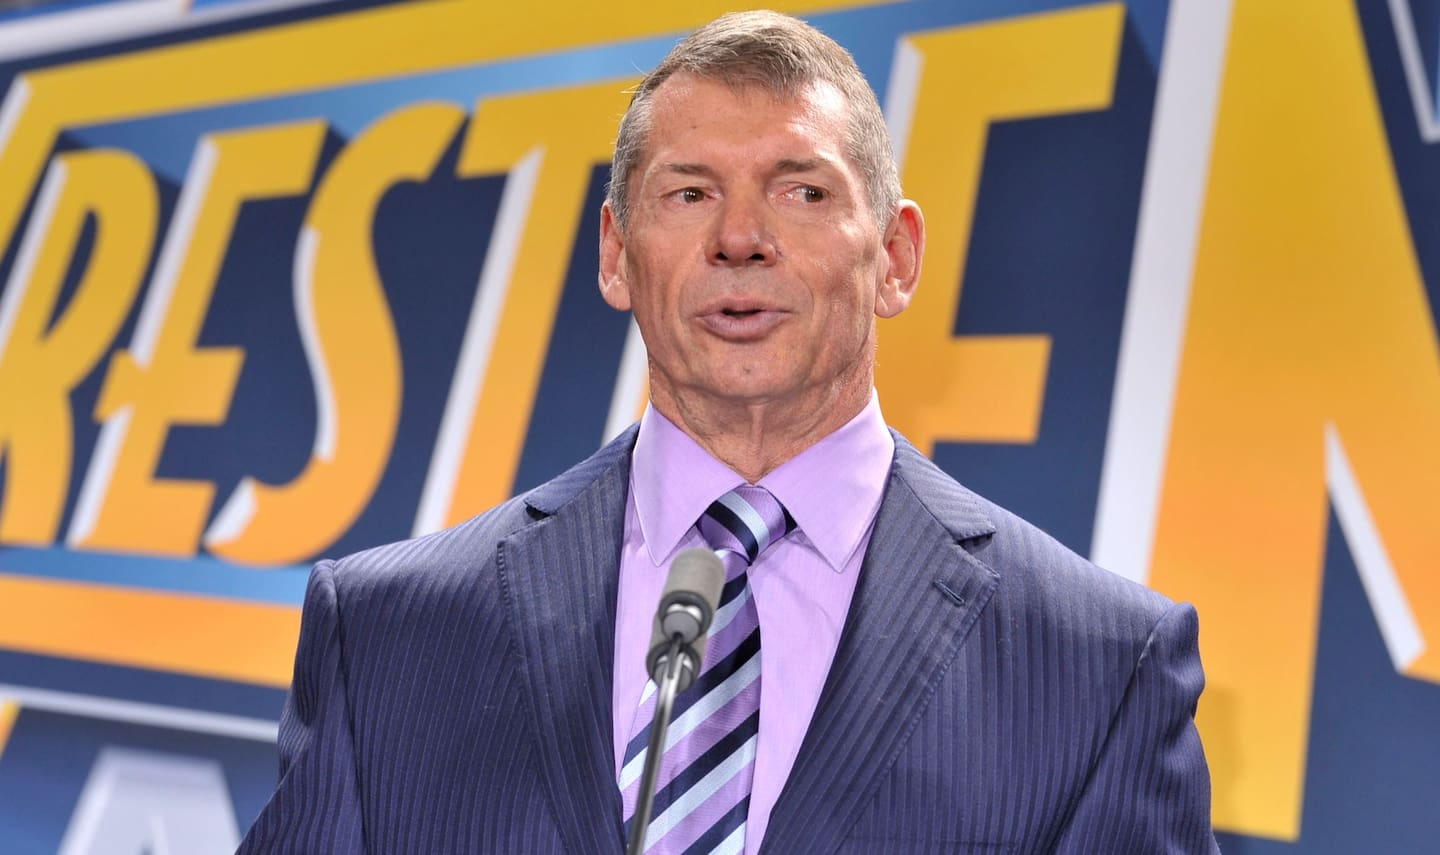 WWE: Immersed in a sexual misconduct scandal, Vince McMahon announces his retirement